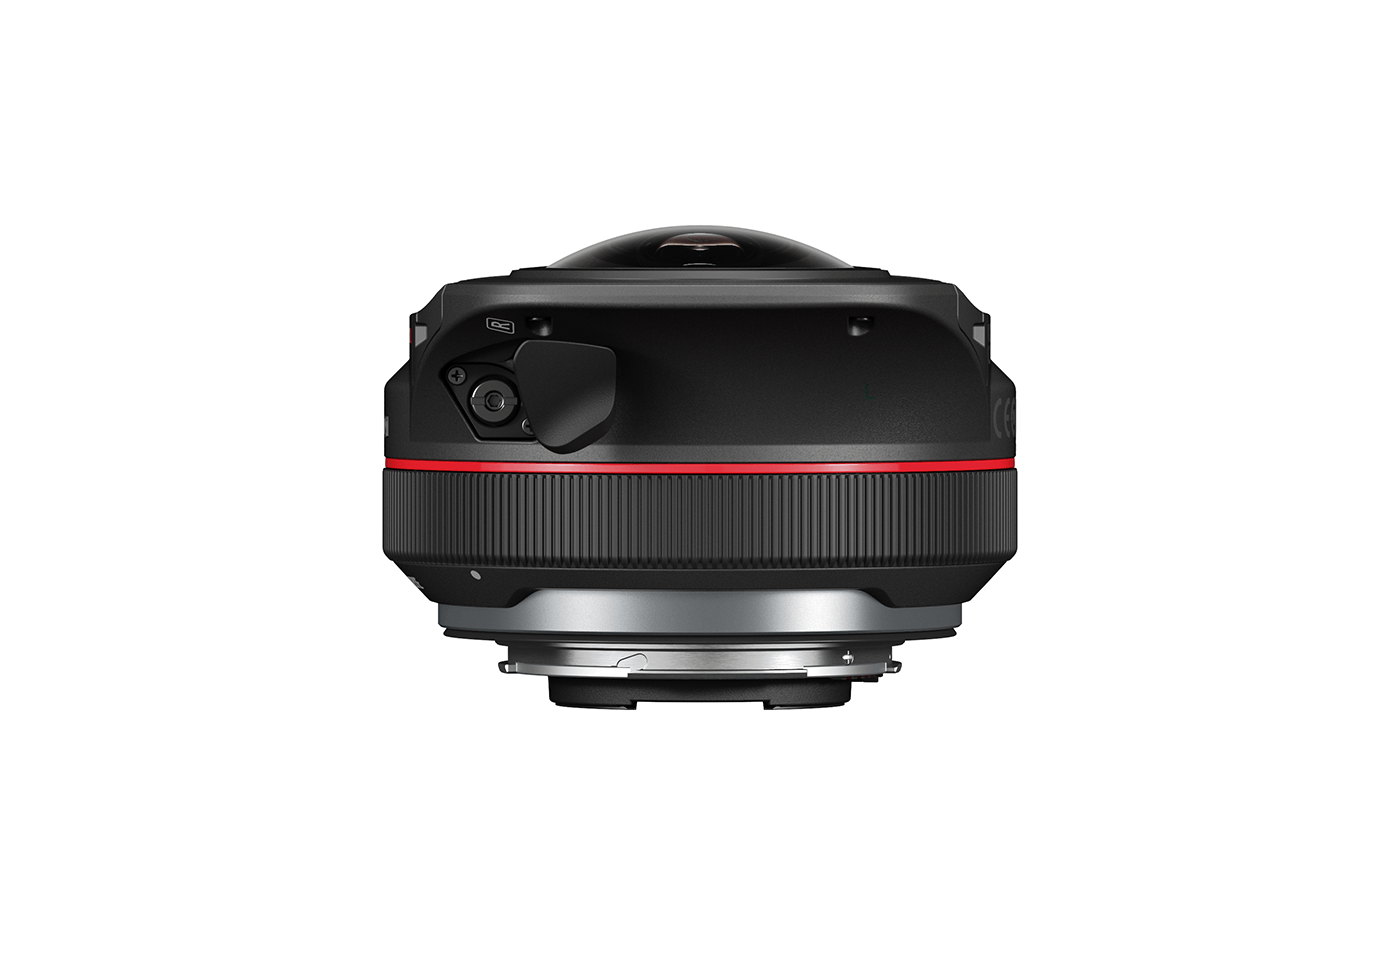 Side profile image of RF 5.2mm f/2.8 L Dual Fisheye lens with switch